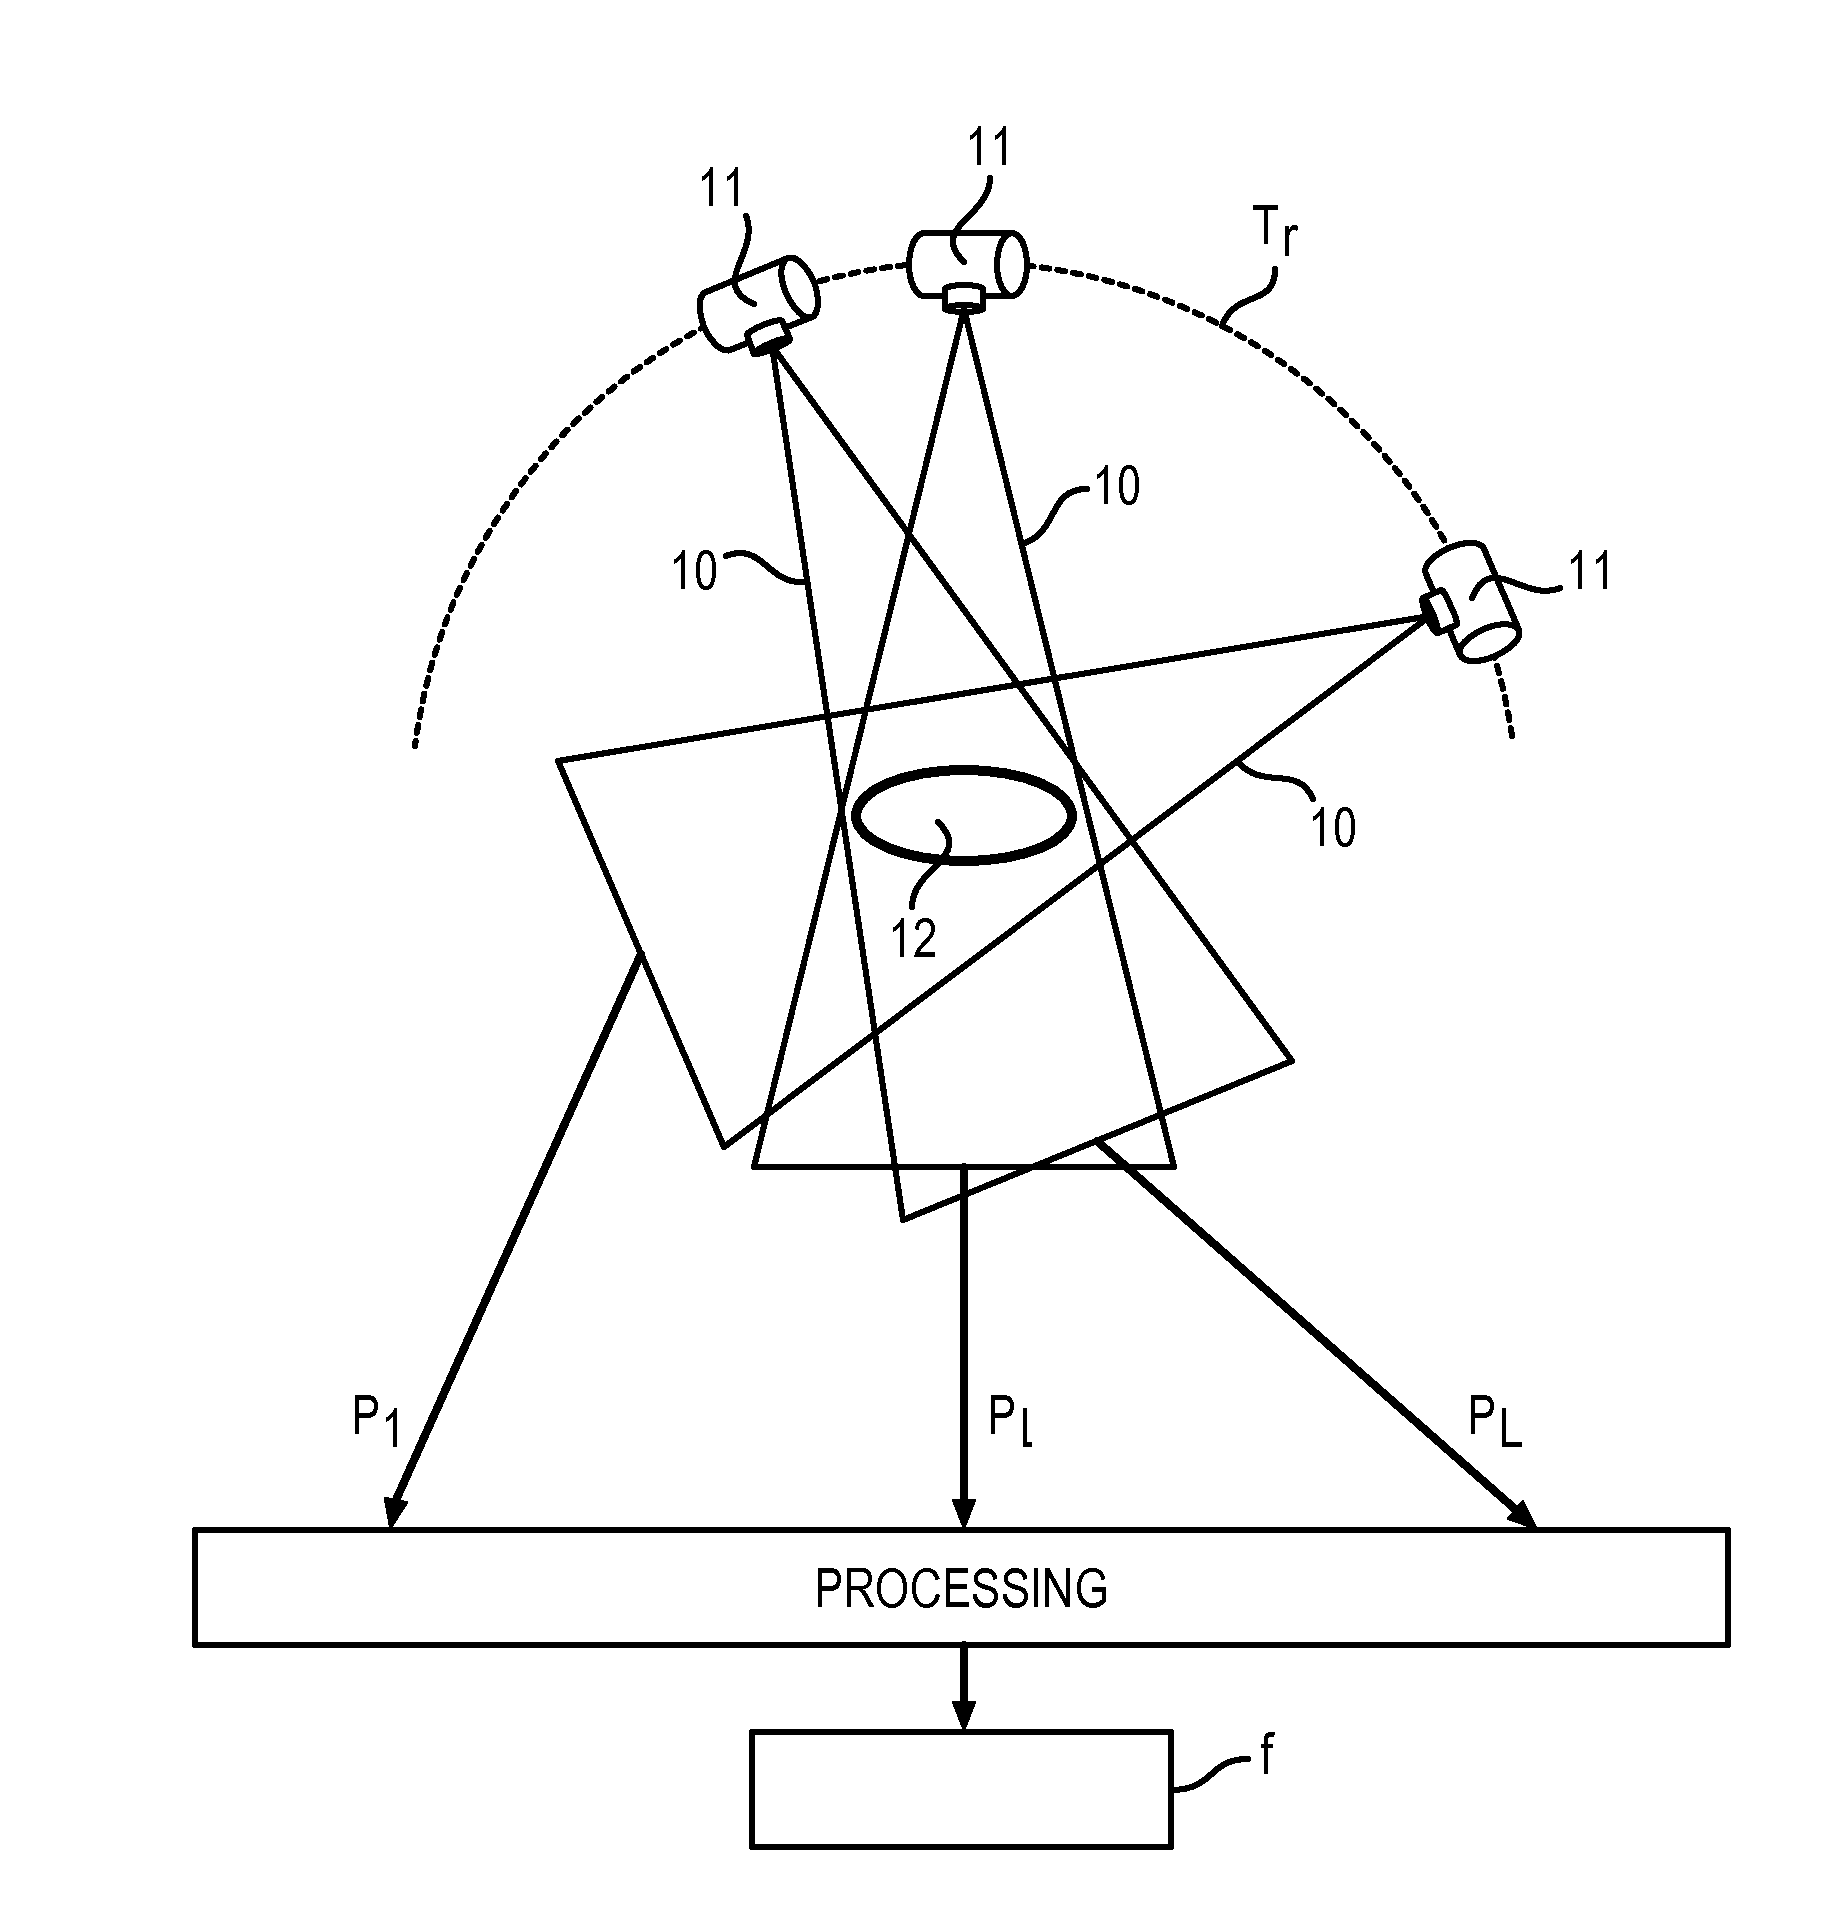 Tomographic reconstruction of a moving object